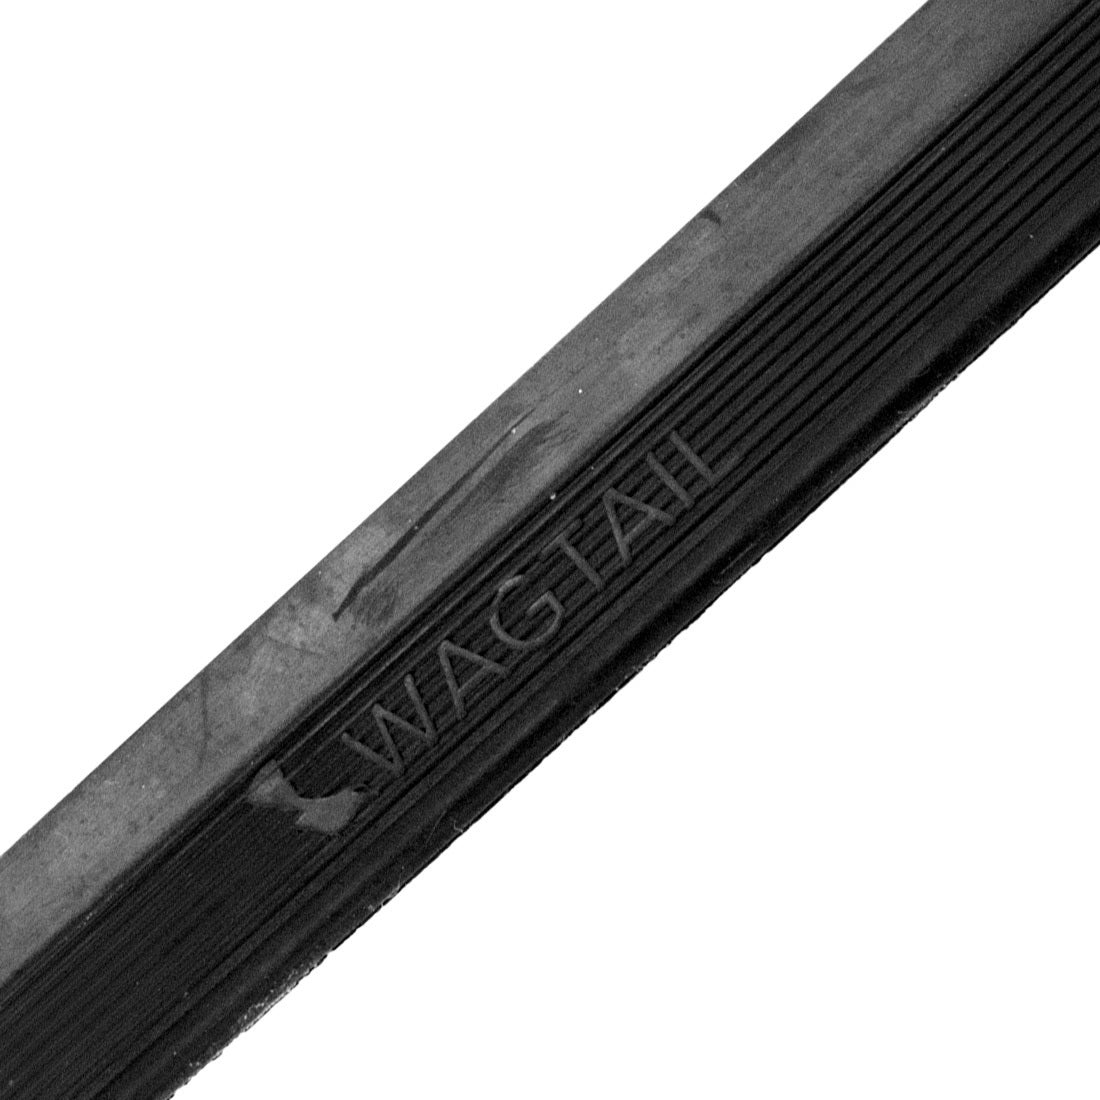 Wagtail 3 Meter Squeegee Rubber, Window Cleaning